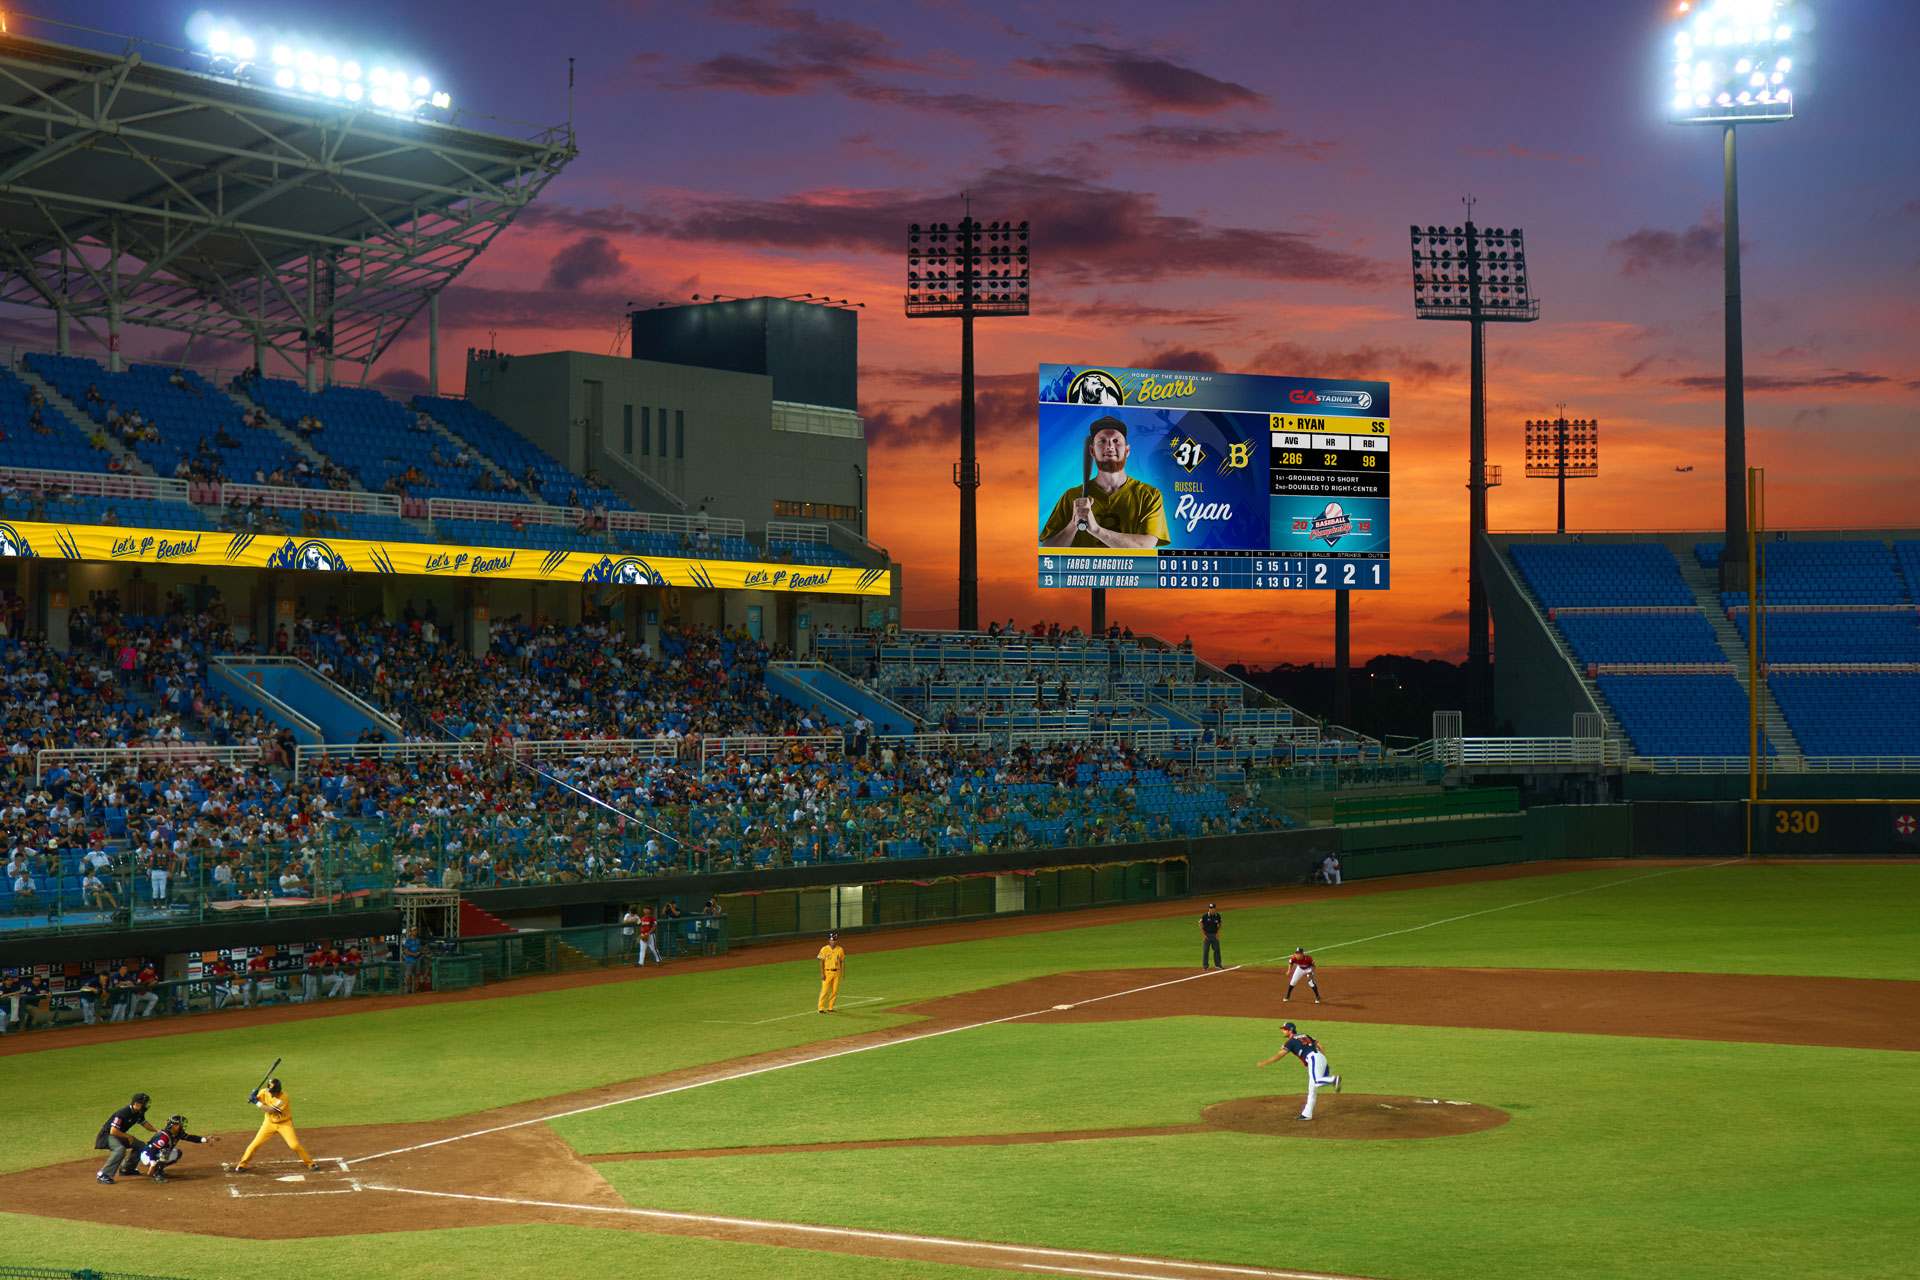 Digital video wall screen content at a baseball stadium created by Incubate Design for Planar